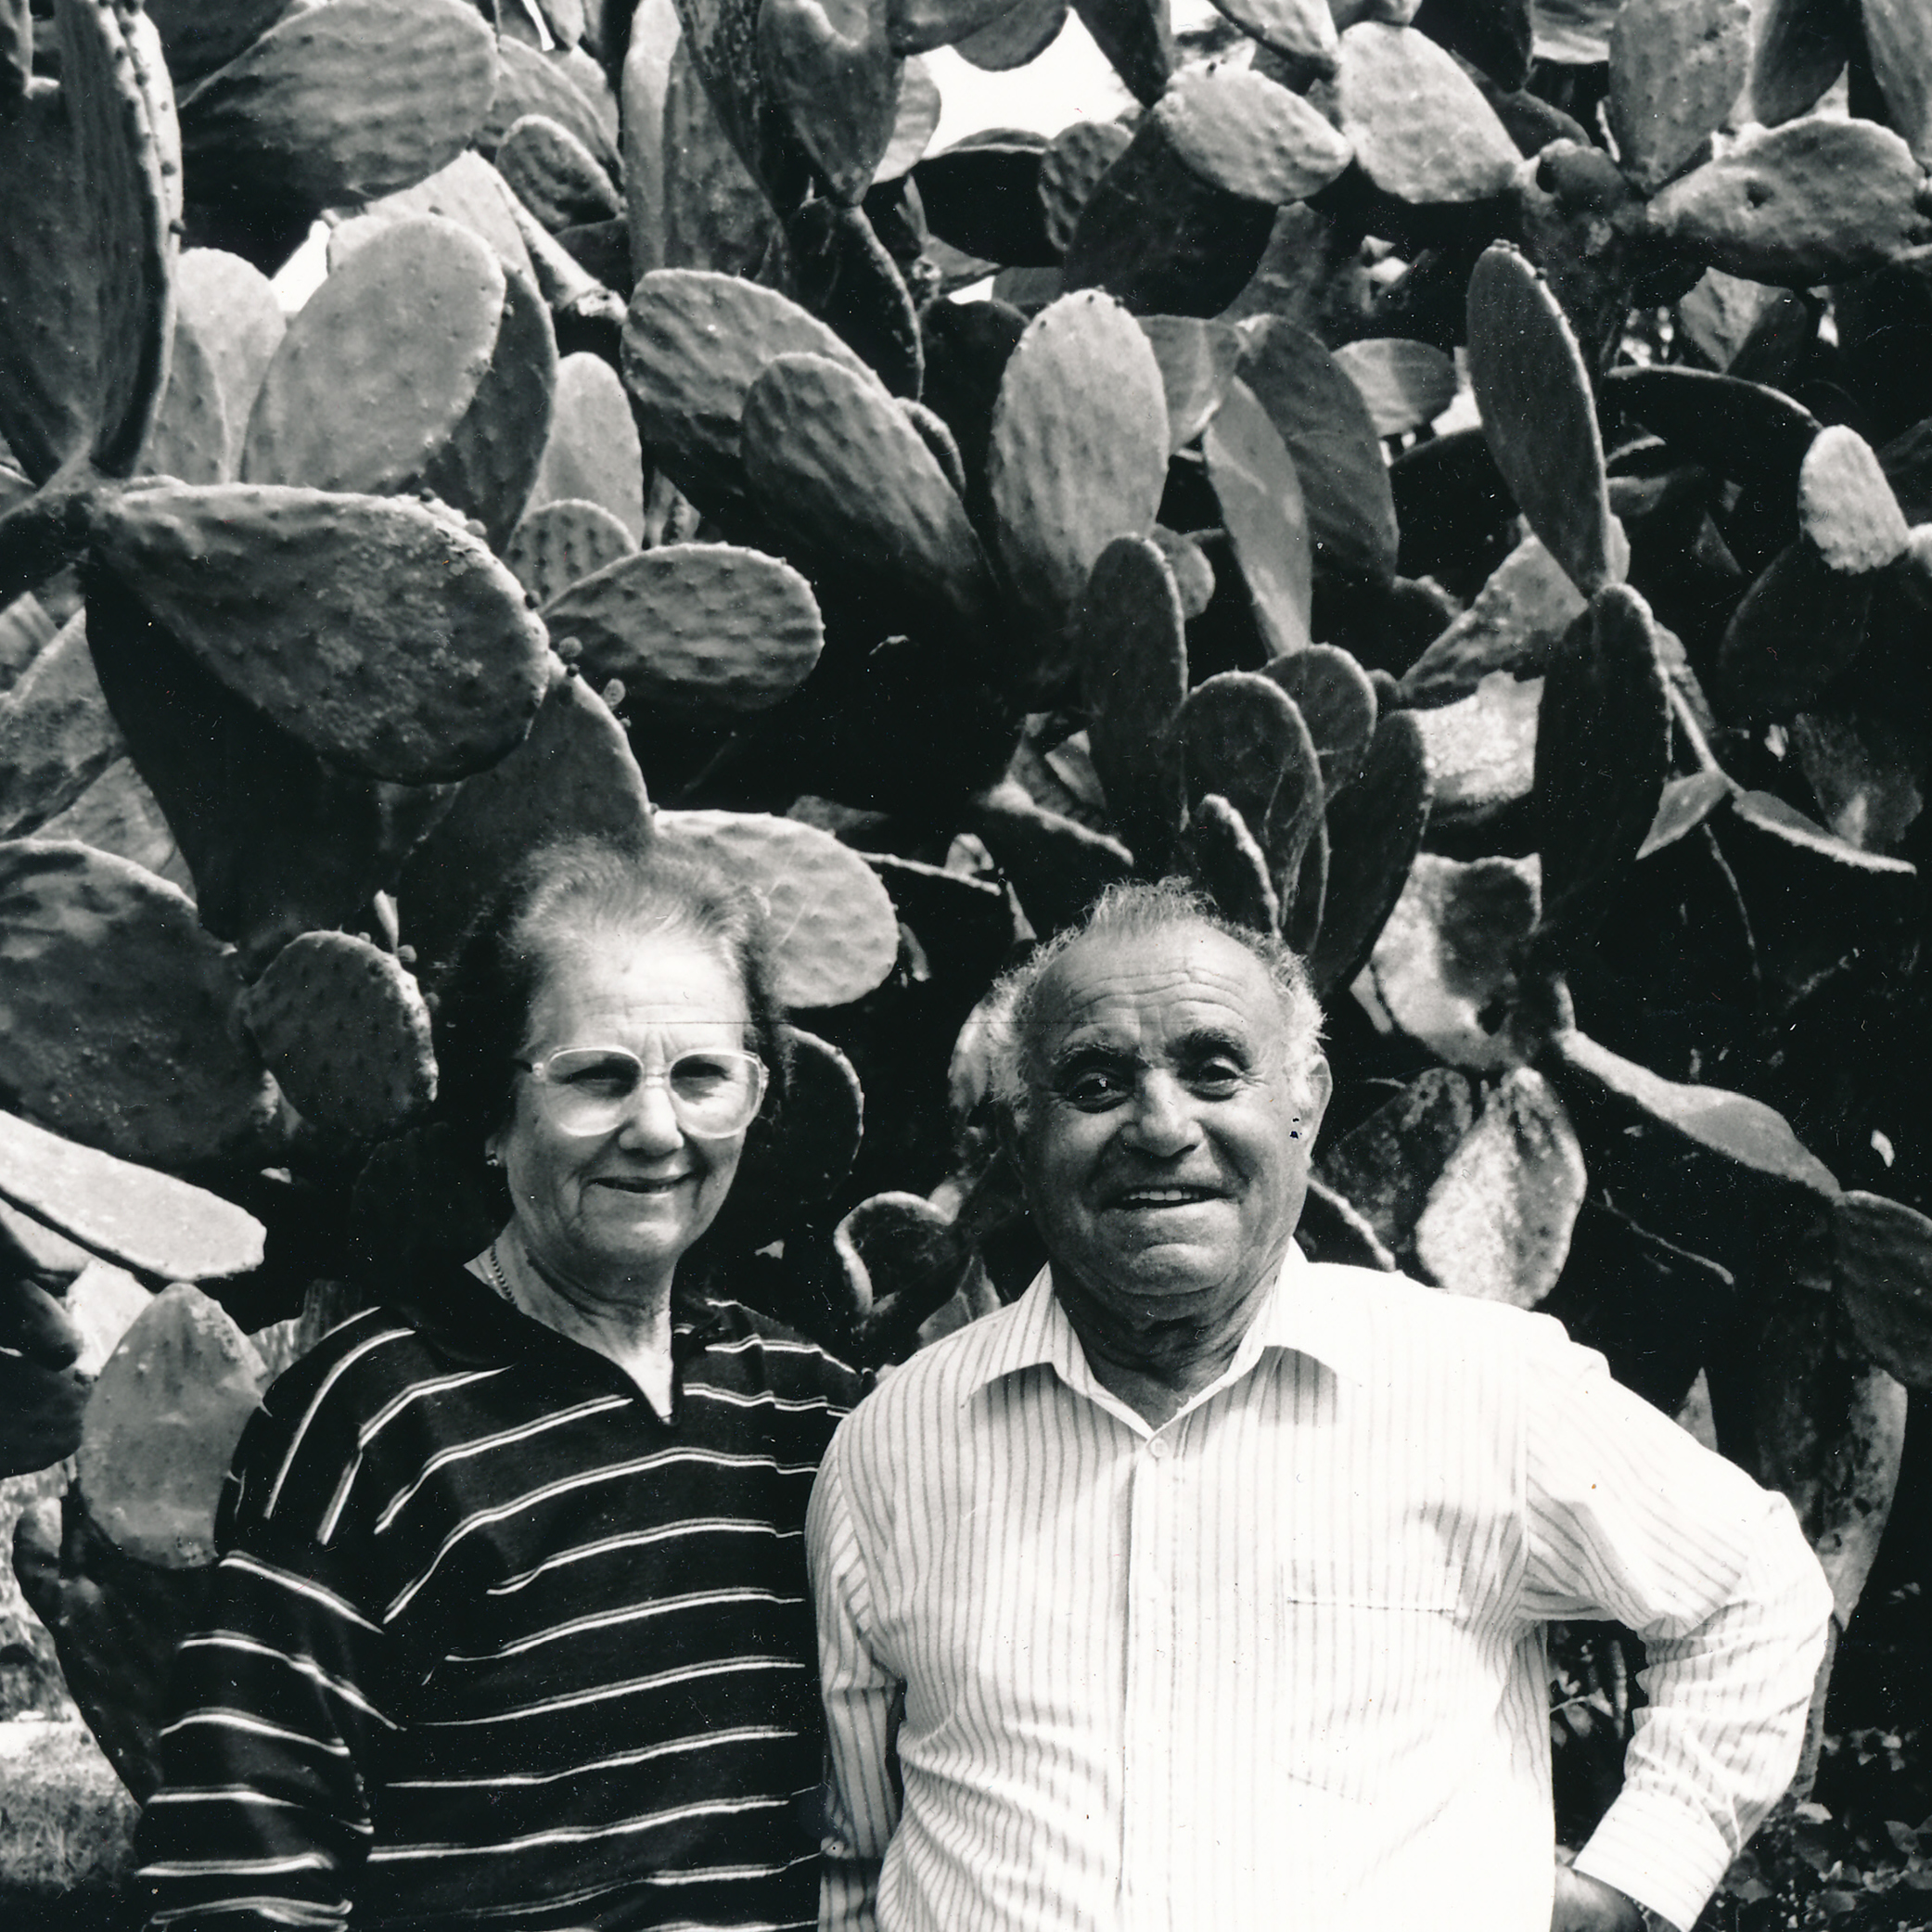 Two people standing in front of a large prickly pear